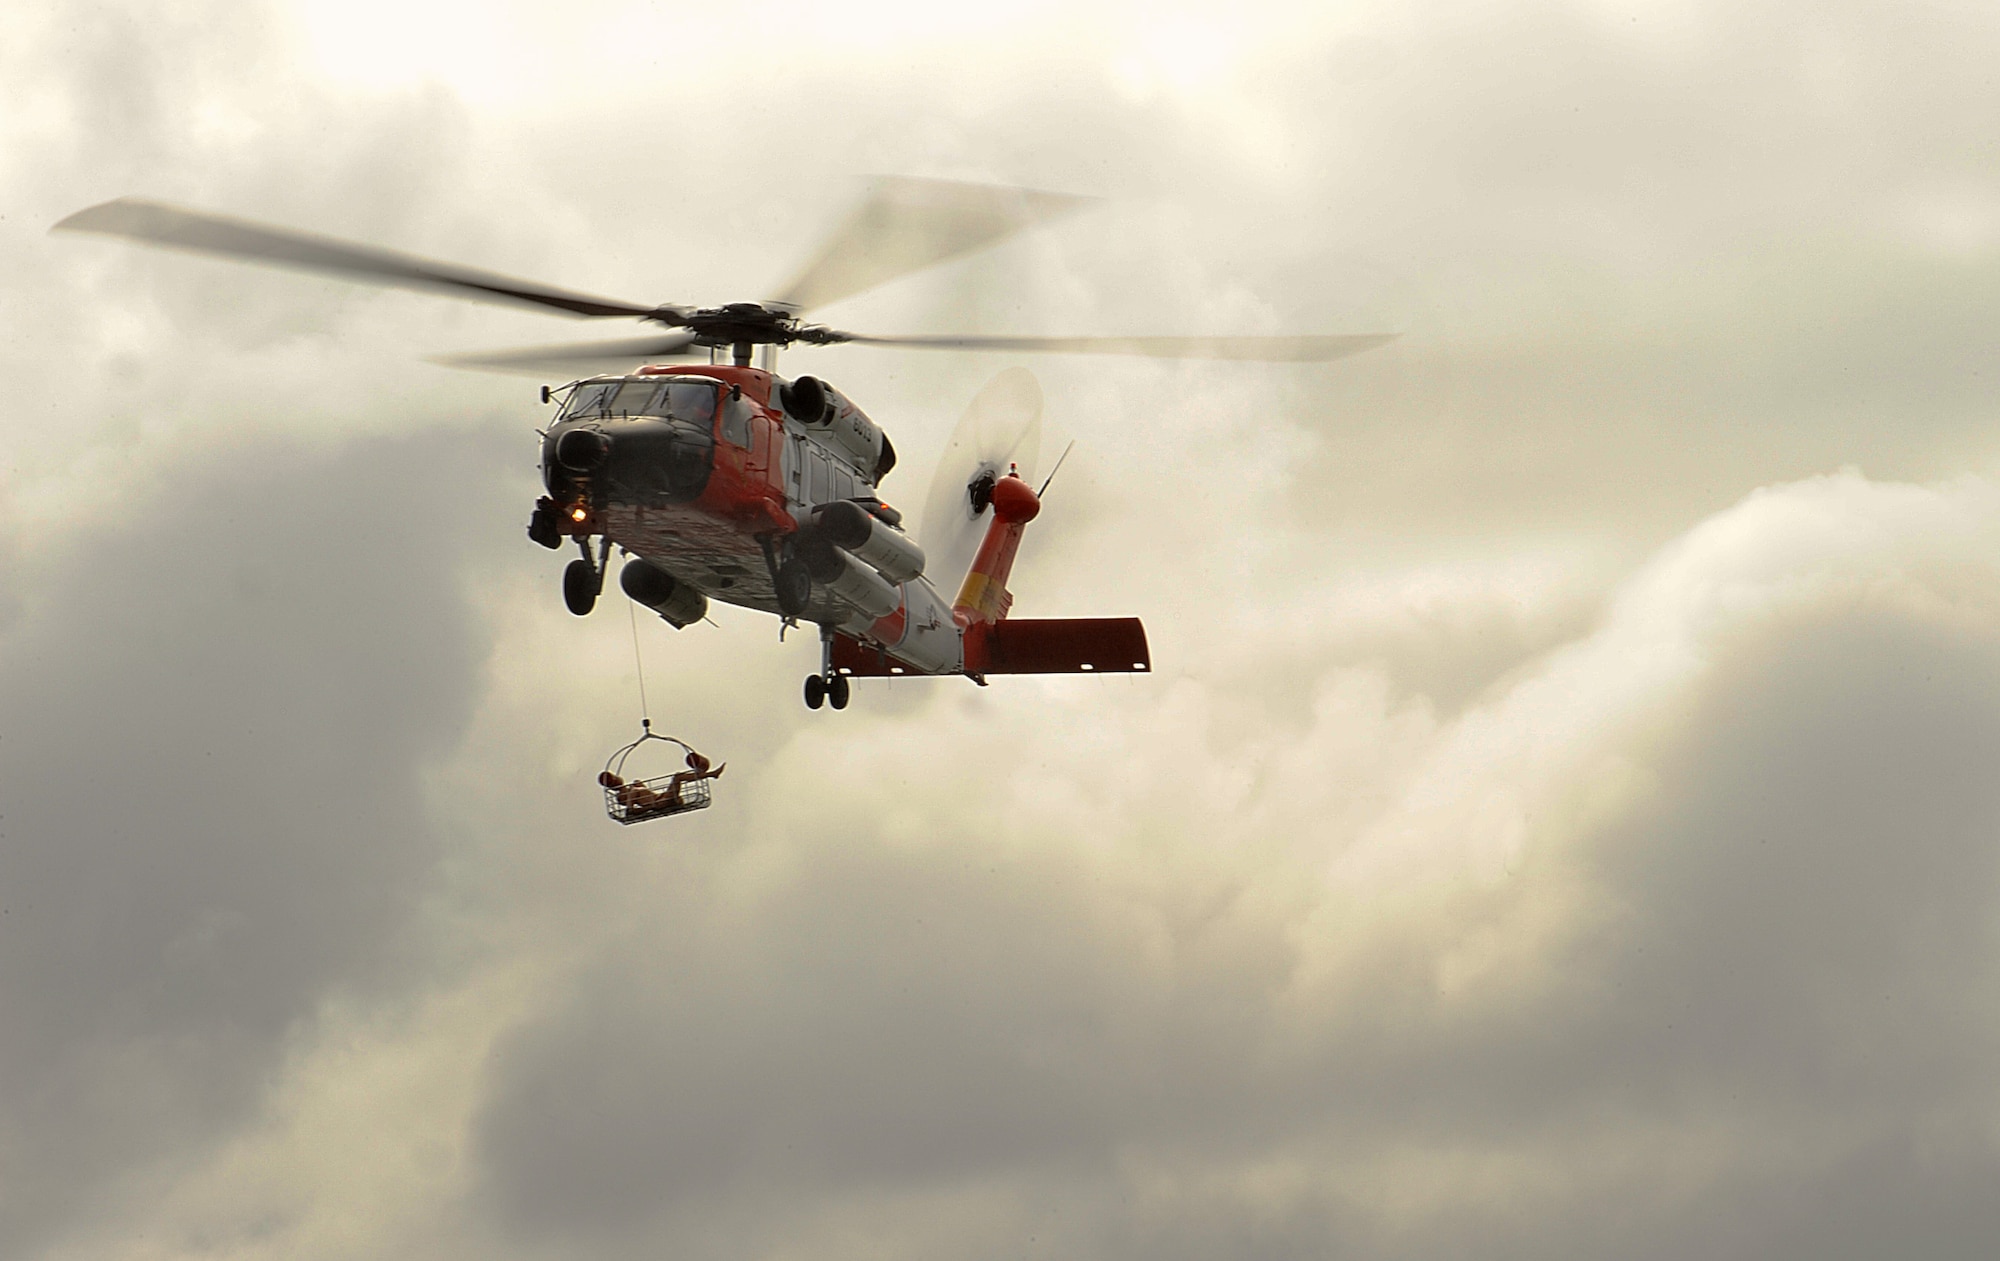 A U.S. Coast Guard HH-60 Jayhawk helicopter, from Air Station Astoria, retrieves a simulated victim from Slusher Lake at Camp Rilea, in Warrenton, Oregon, during the Pathfinder-Minutemen Exercise, Aug. 5, 2015 at Camp Rilea in Warrenton, Ore. The annual event is a joint multi-agency, multi-state disaster preparedness exercise based on response to a possible Cascadia Subduction Zone event. Officials believe the Northwest is overdue for a magnitude 7.0 or greater earthquake. (U.S. Air National Guard photo by Tech. Sgt. John Hughel, 142nd Fighter Wing Public Affairs/Released)
